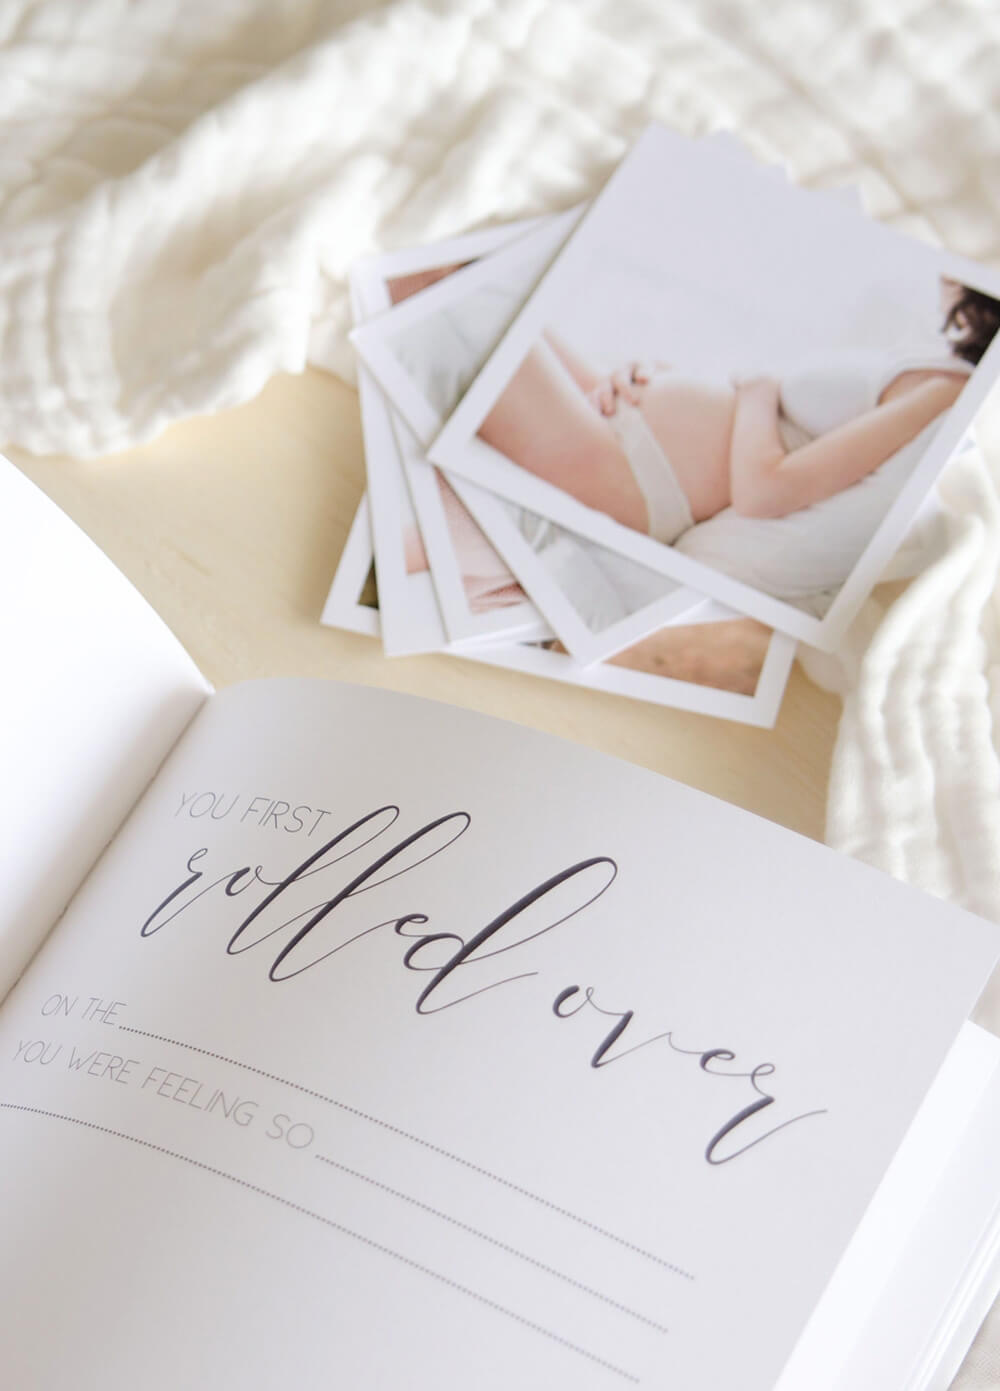 Hello Little Love Pregnancy & Baby Journal in White by Blossom & Pear